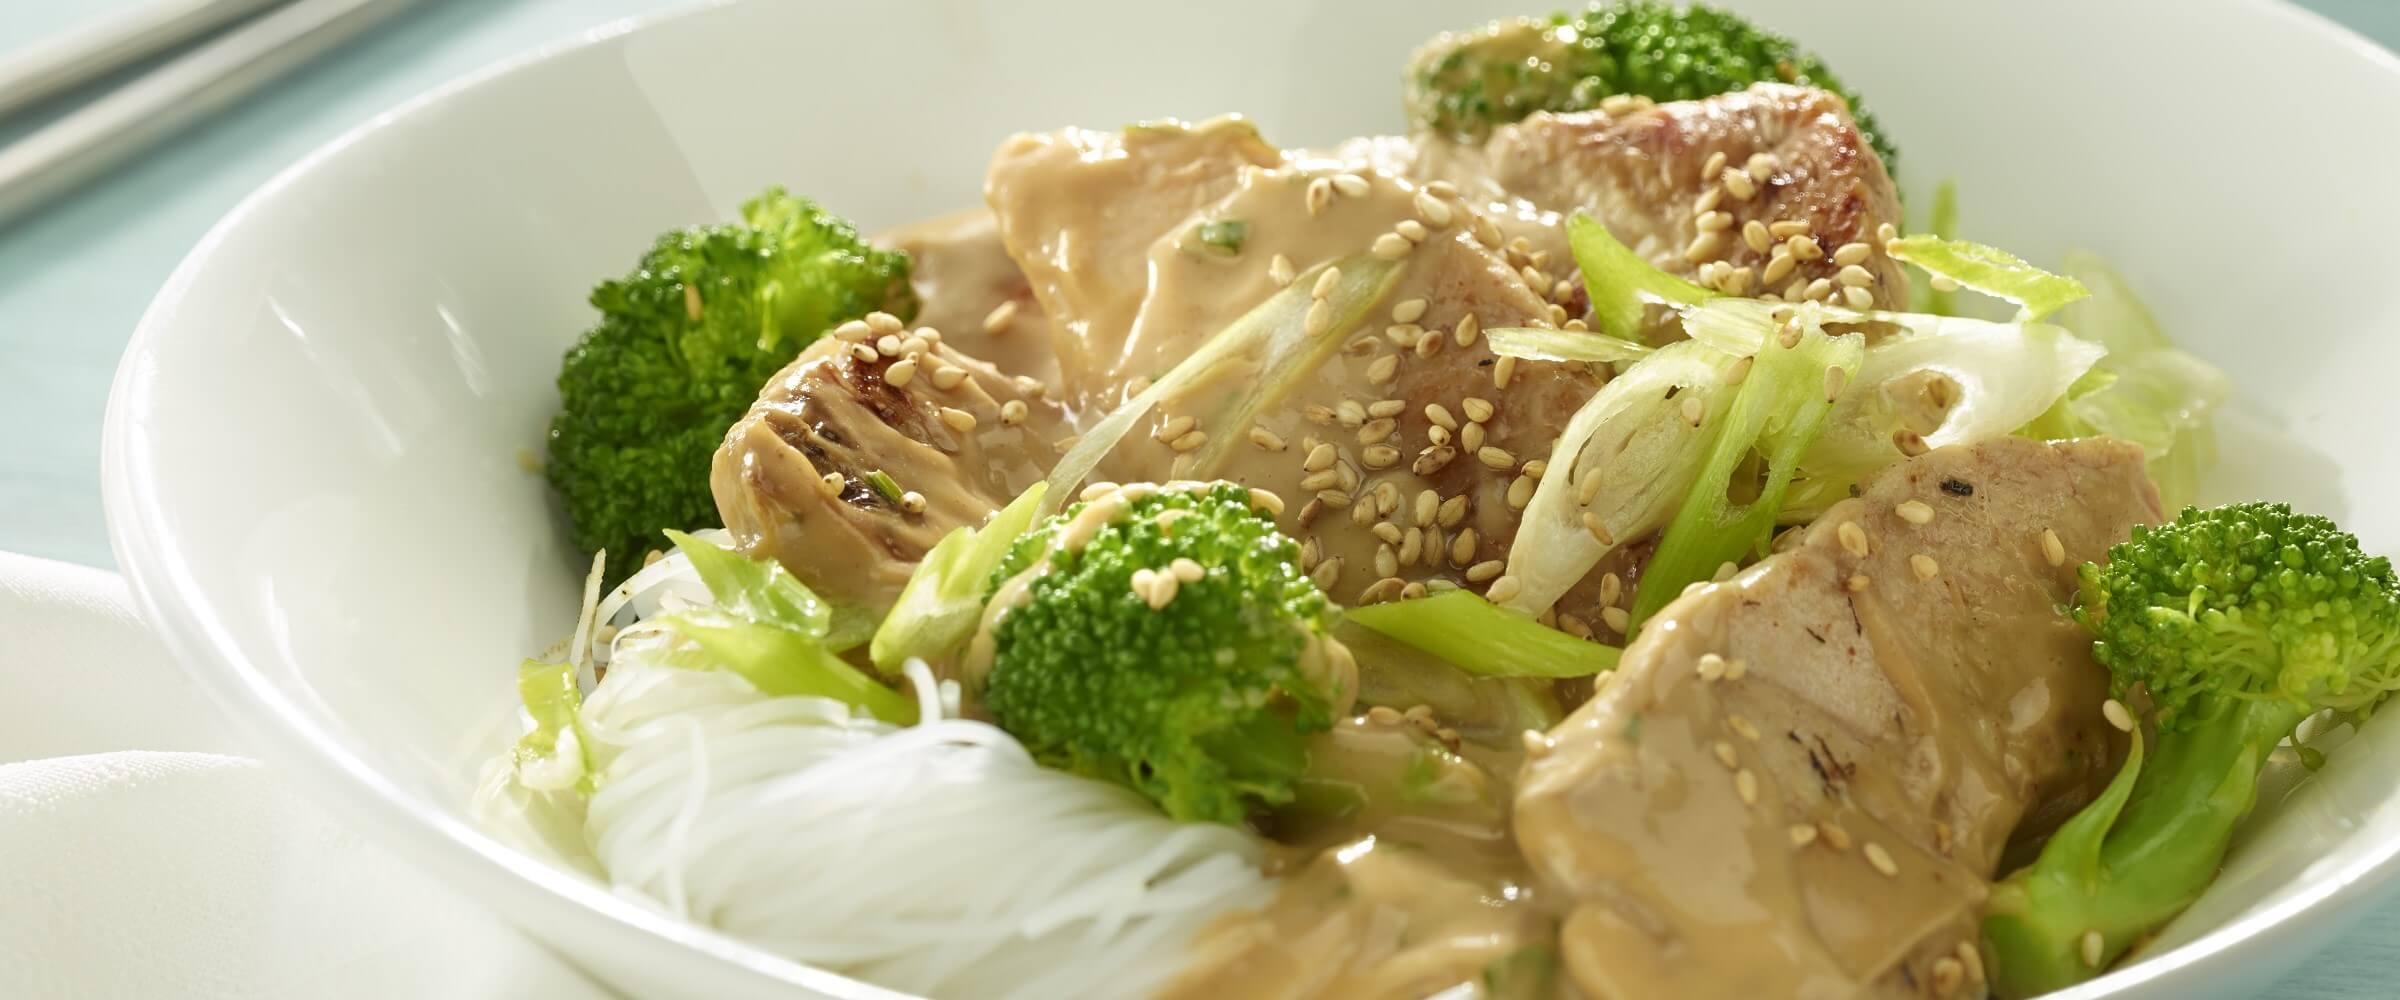 turkey peanut noodles with broccoli in white bowl